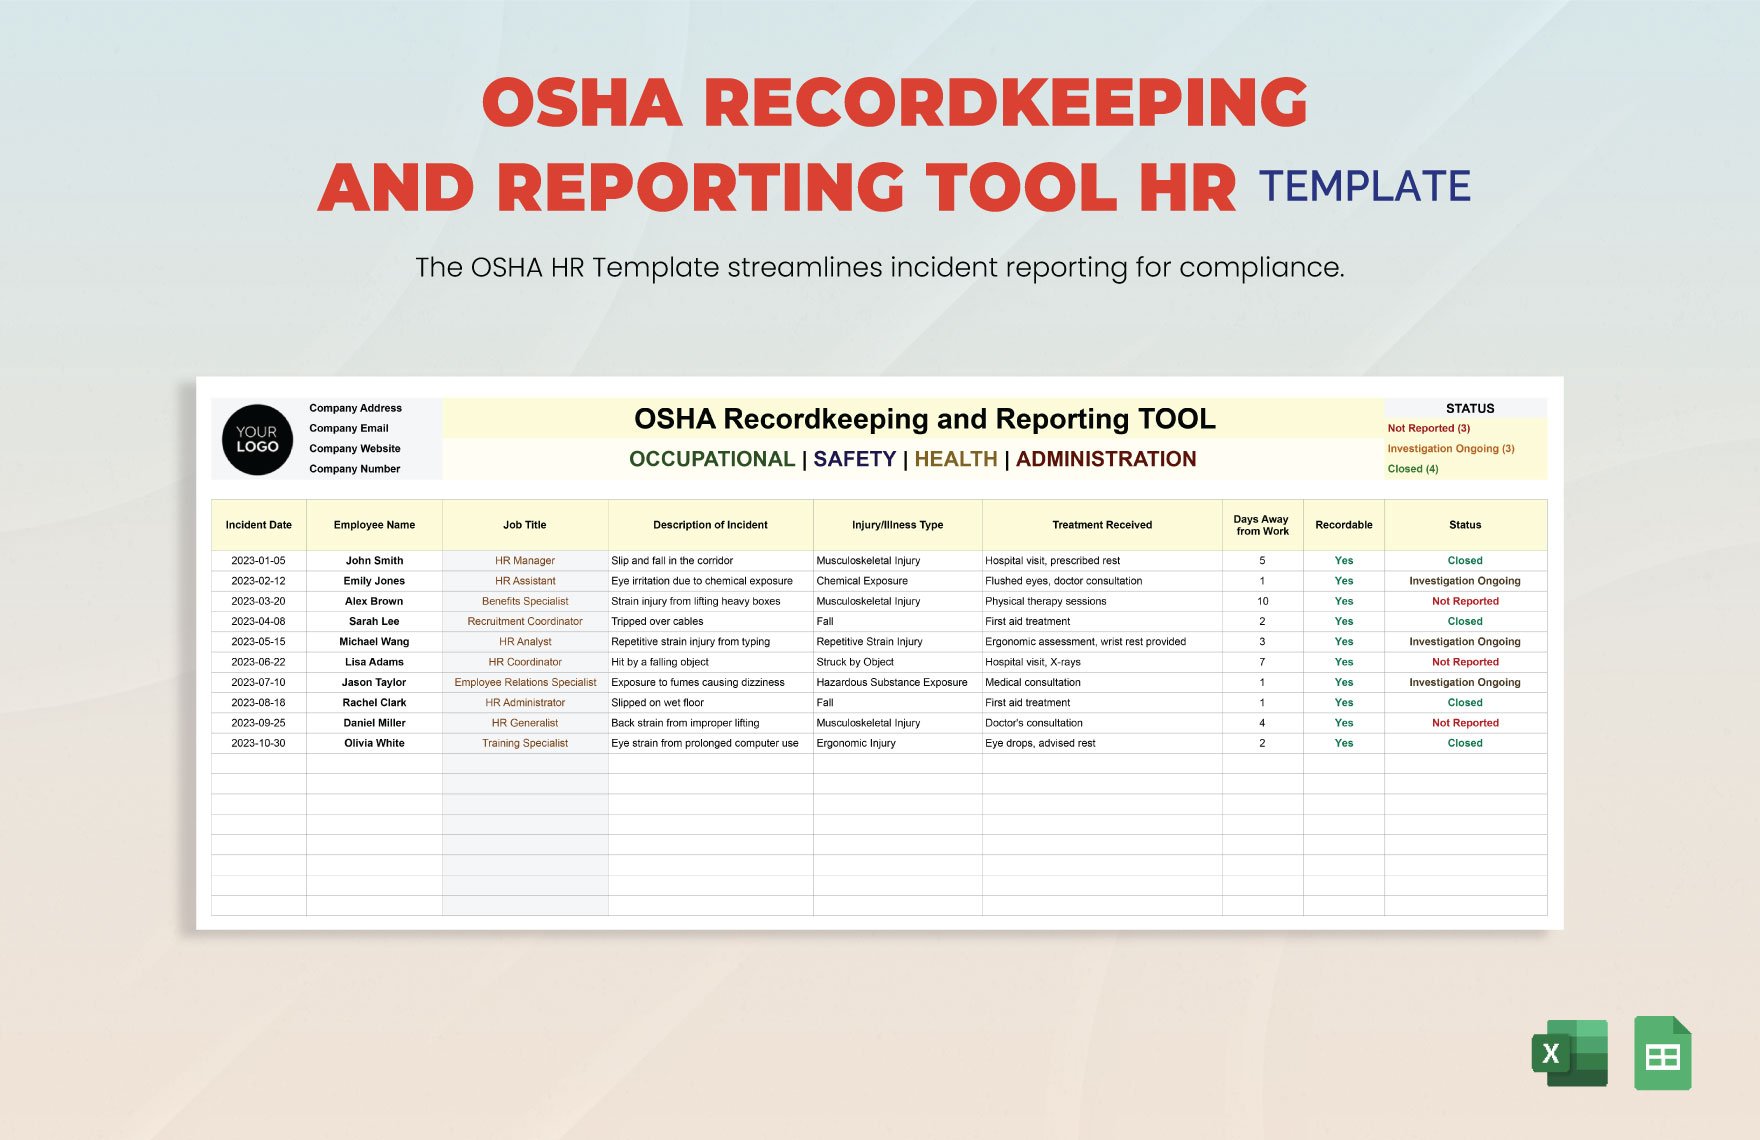 OSHA Recordkeeping and Reporting Tool HR Template